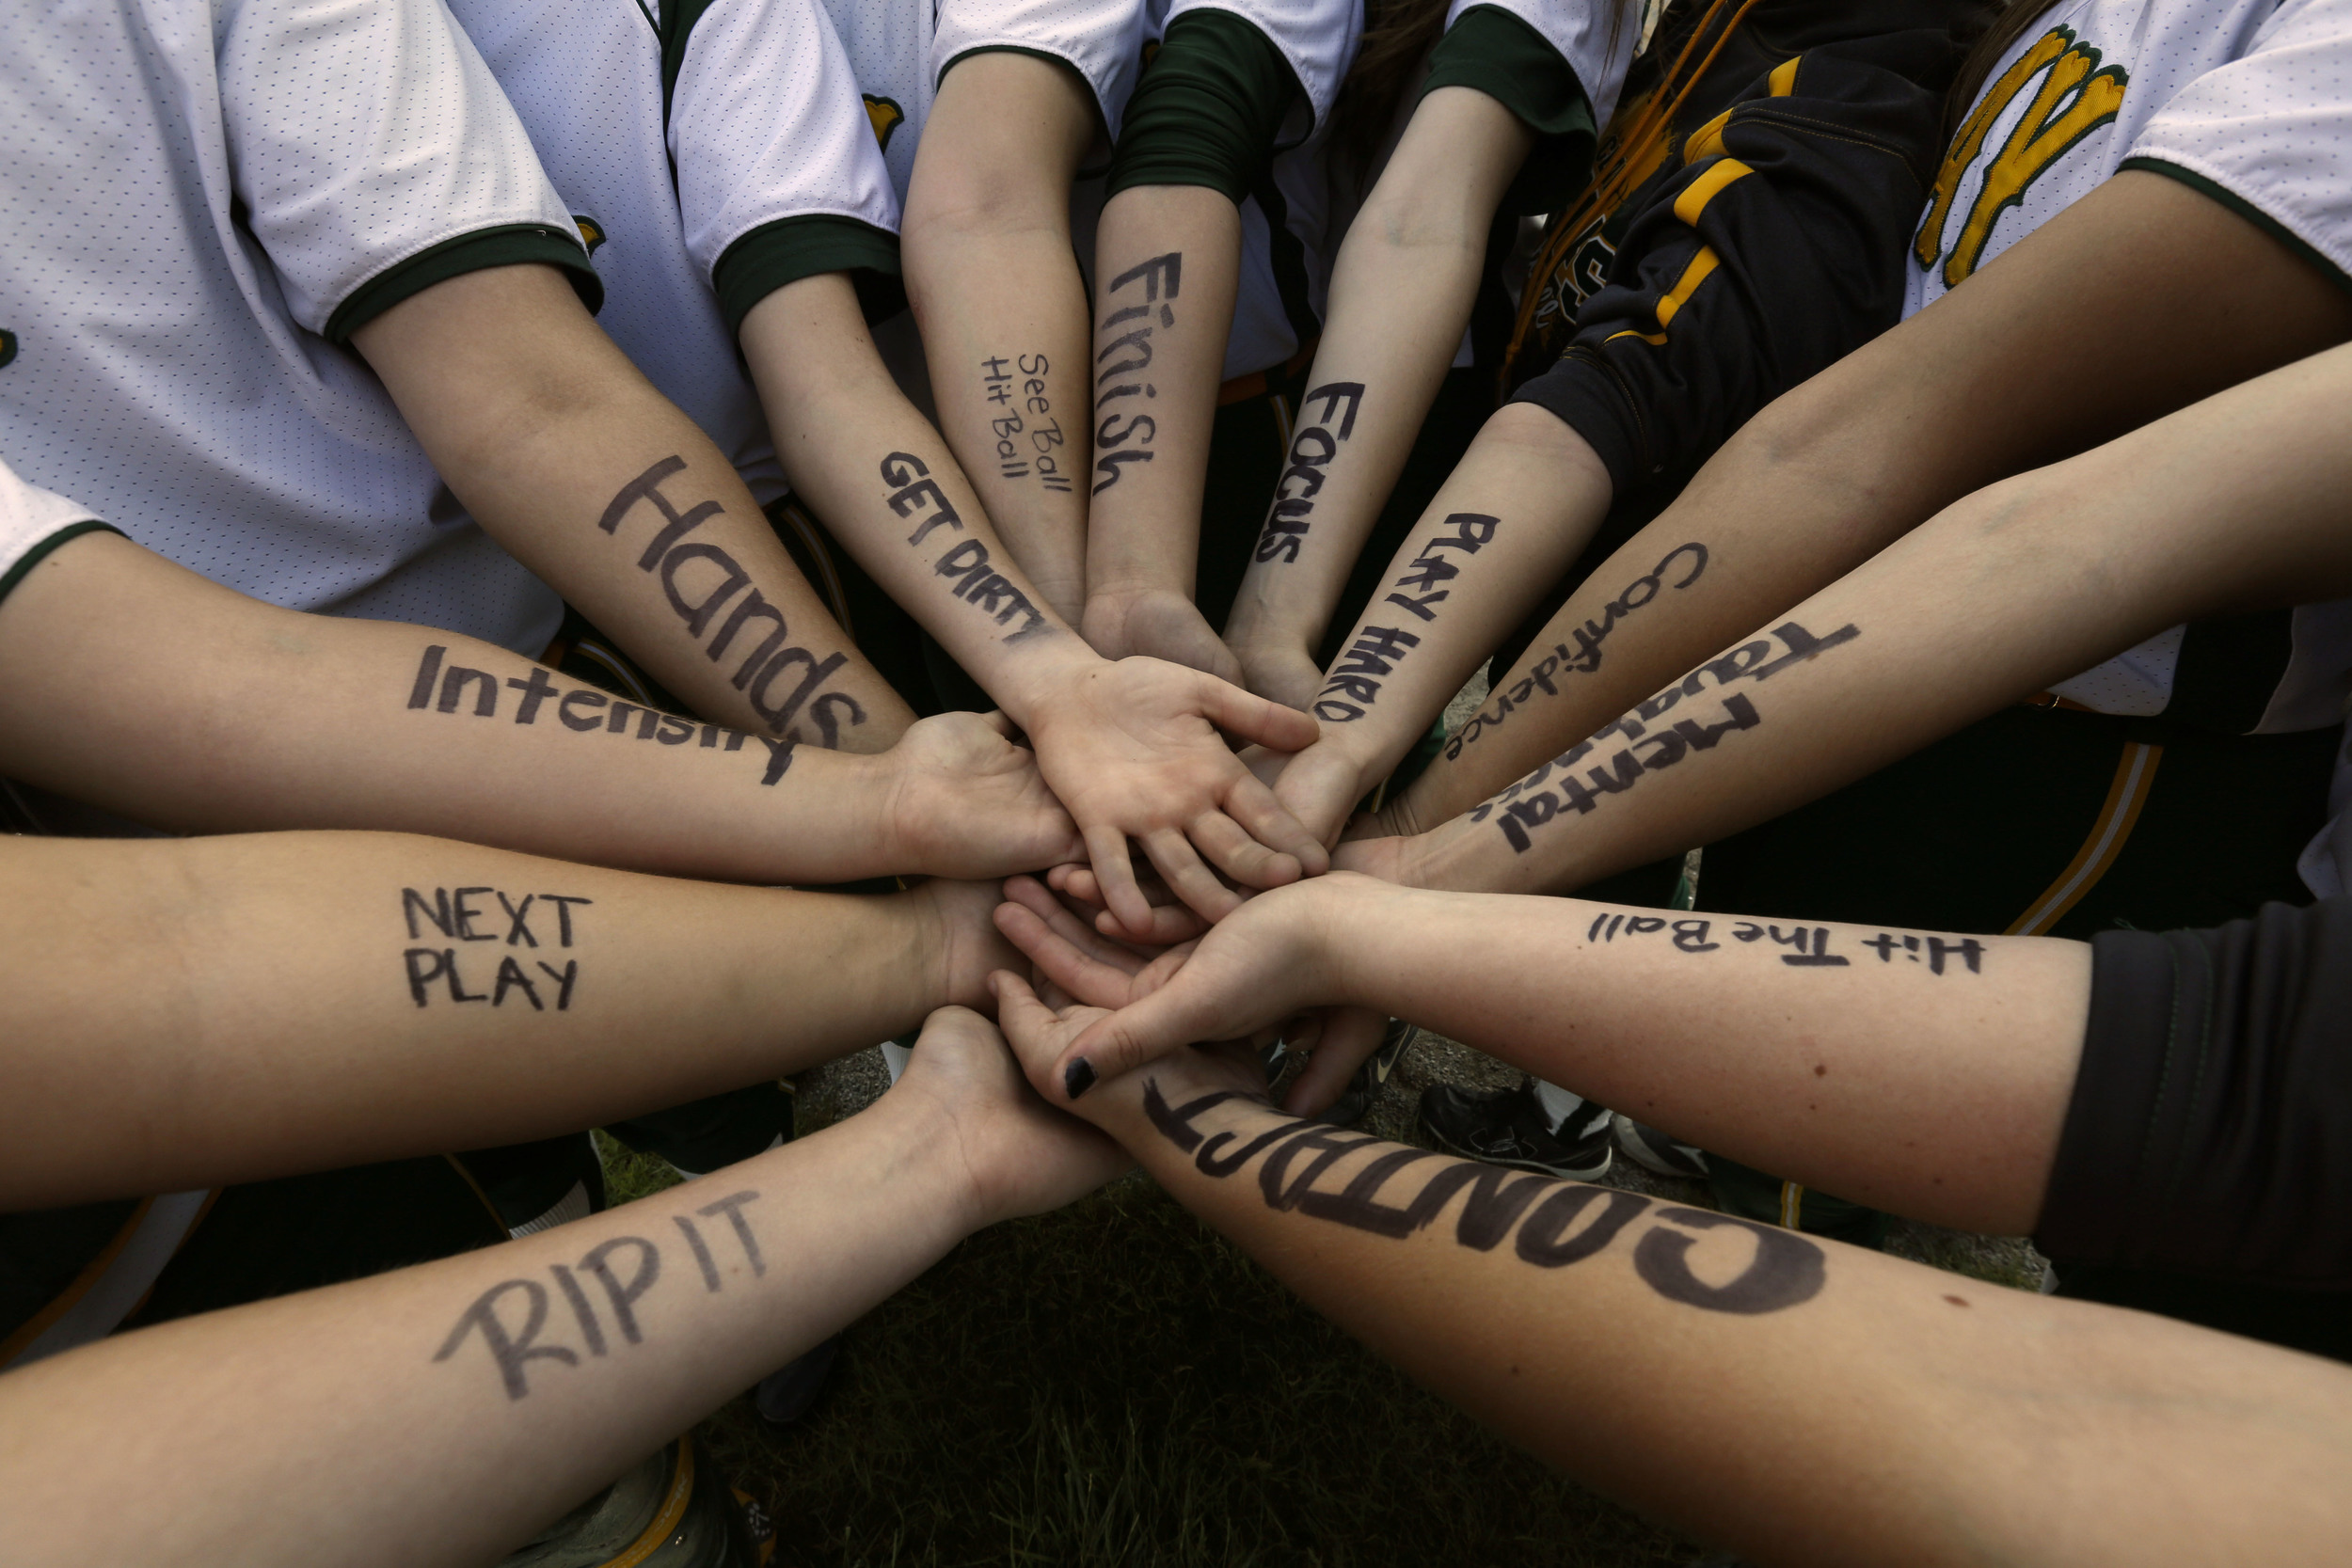   Clay High School softball players write messages of inspiration on their arms for the Div. 1 semi final softball game against Springfield at Rolf Park in Maumee, Ohio. Clay advanced to the finals.&nbsp; ©Toledo Blade   The how and why of it:&nbsp; 